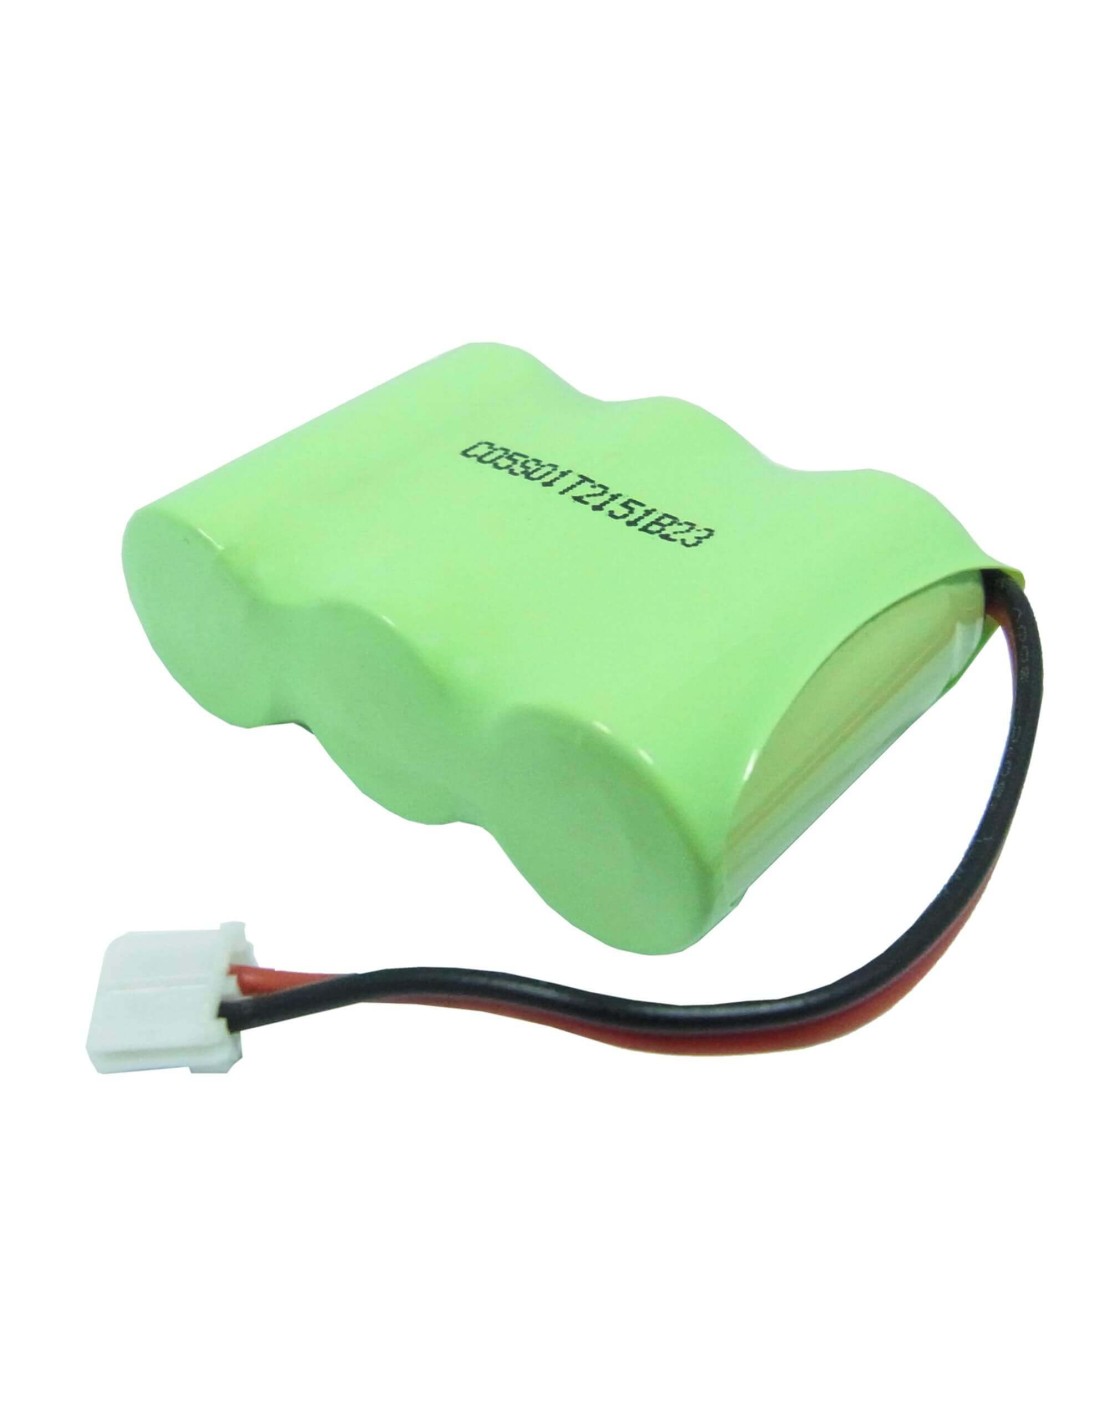 Battery for Conair, Ctp6000, Ctp-6000, Ctp9000, Ctp-9000 3.6V, 600mAh - 2.16Wh